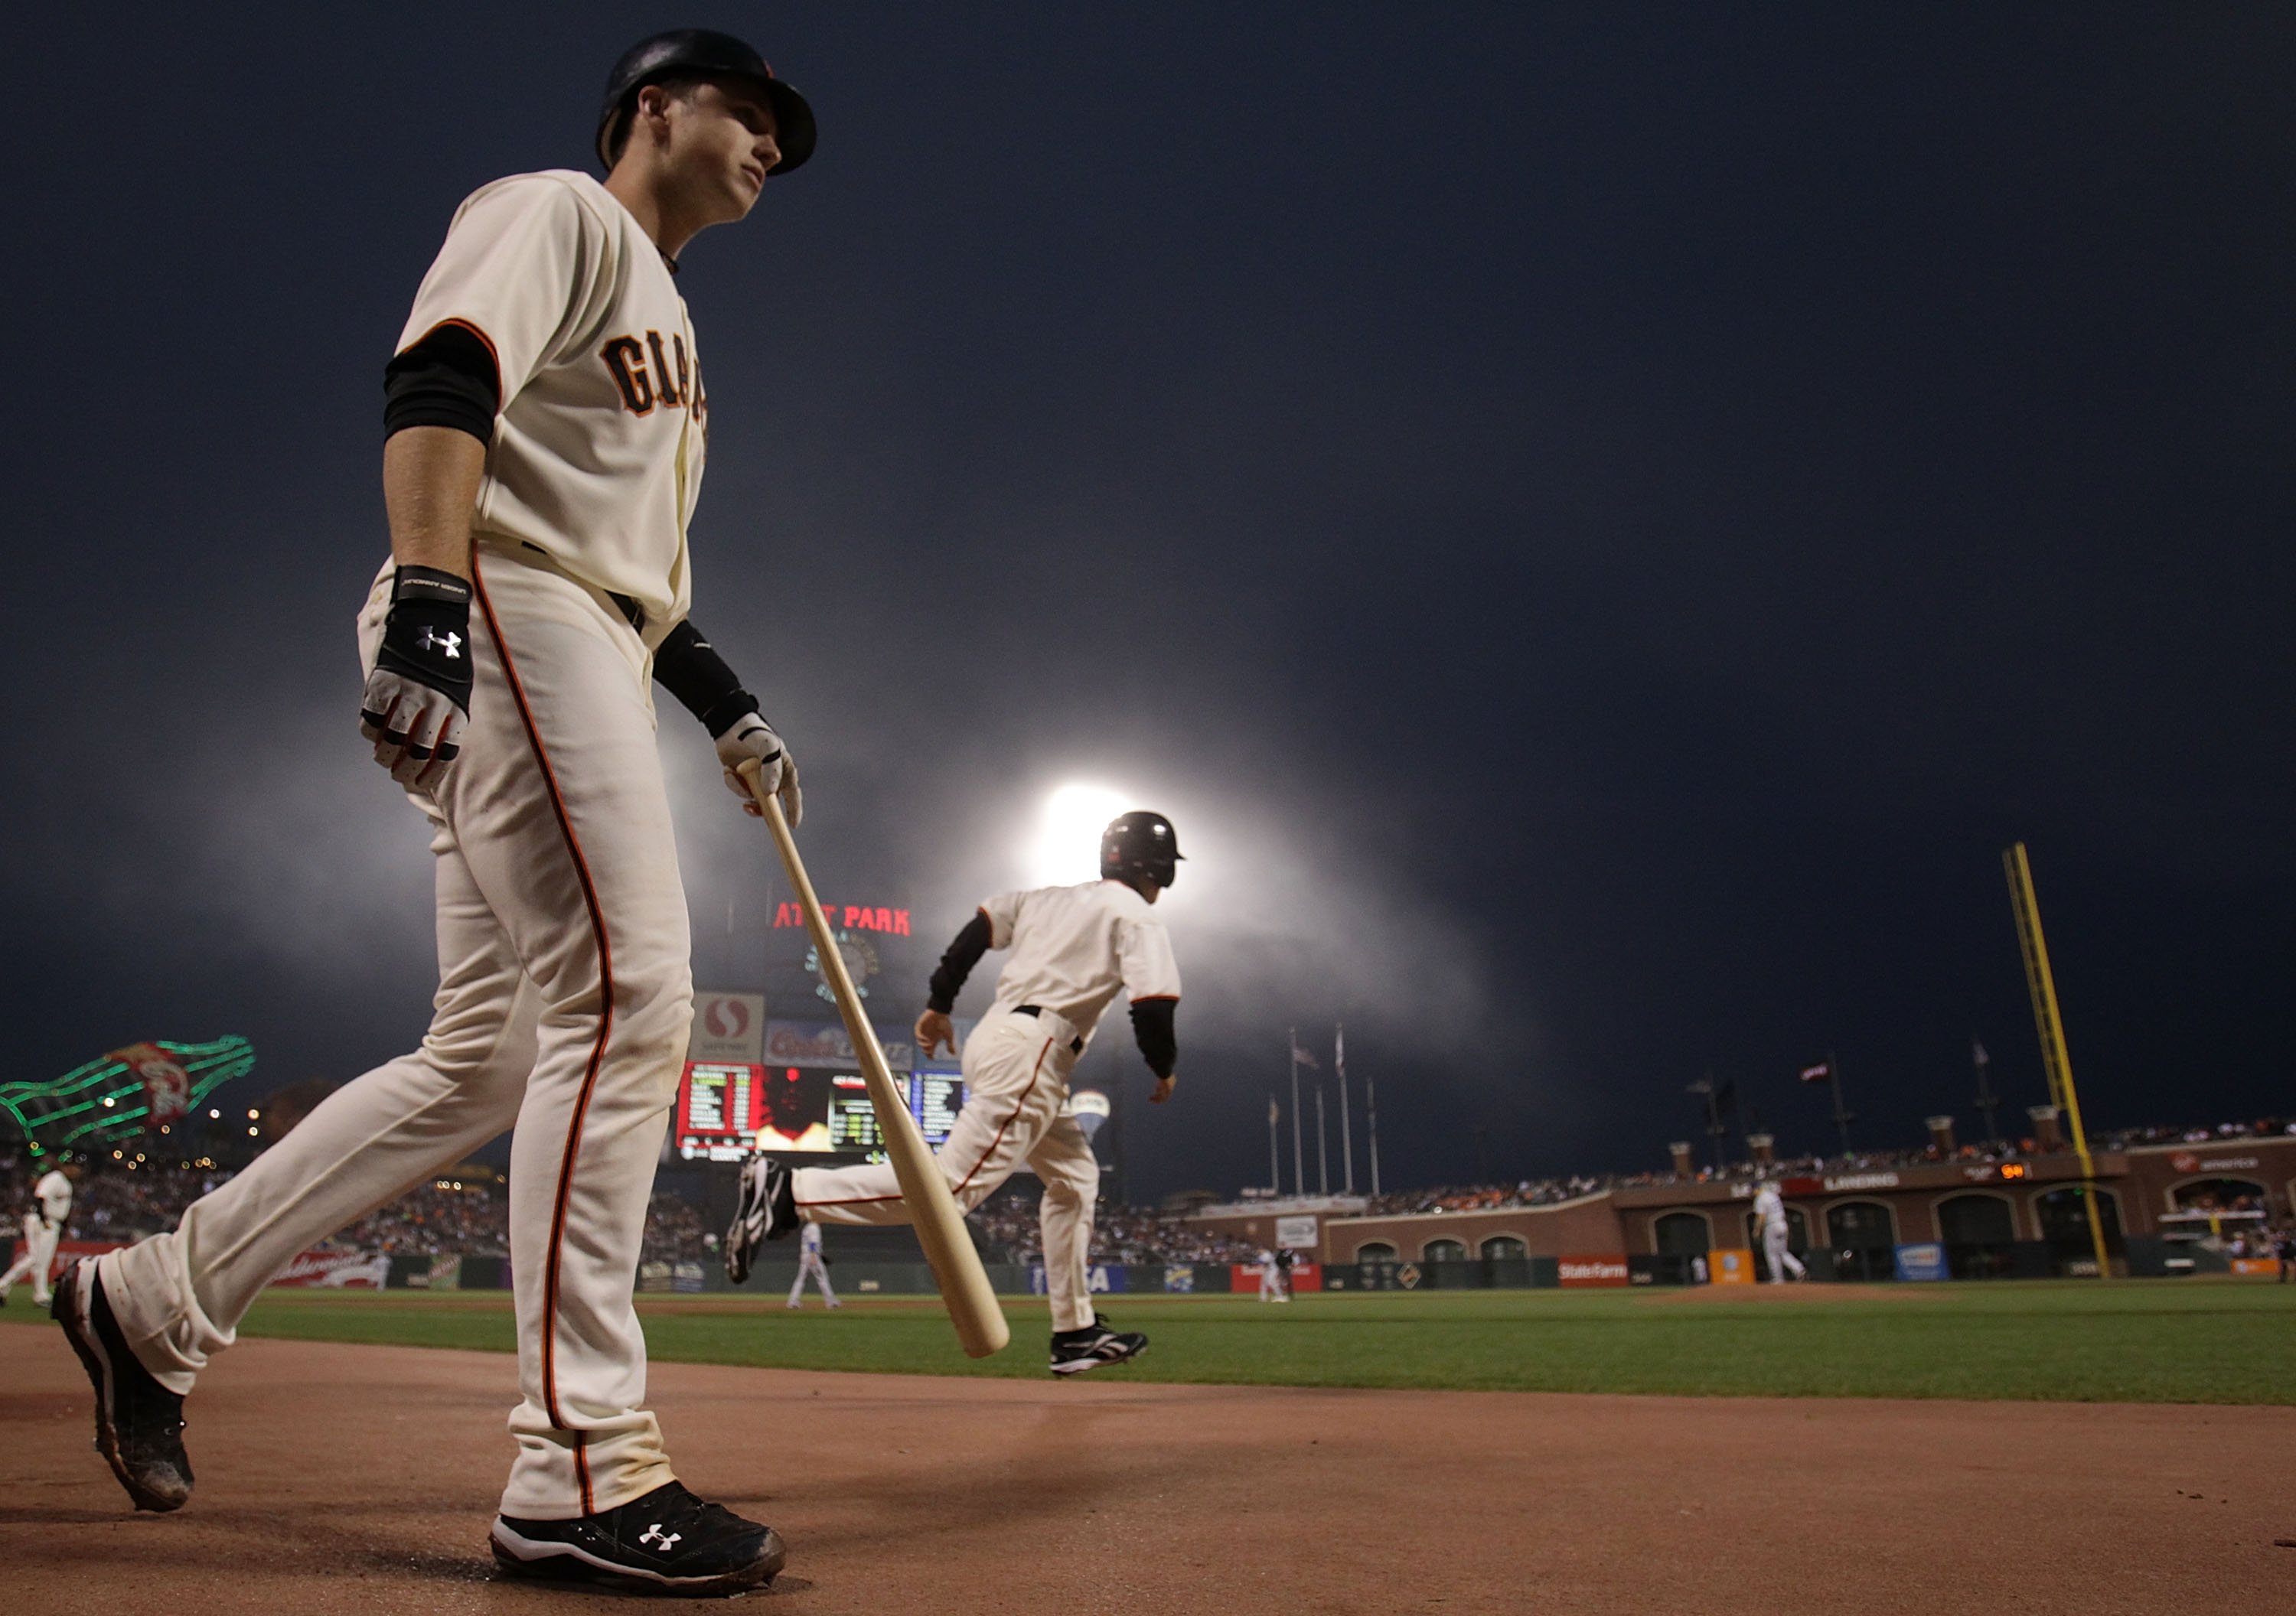 SAN FRANCISCO - SEPTEMBER 16: Buster Posey #28 of the San Francisco Giants walks to the plate against the Los Angeles Dodgers during a Major League Baseball game at AT&T Park on September 16, 2010 in San Francisco, California. (Photo by Jed Jacobsohn/Gett